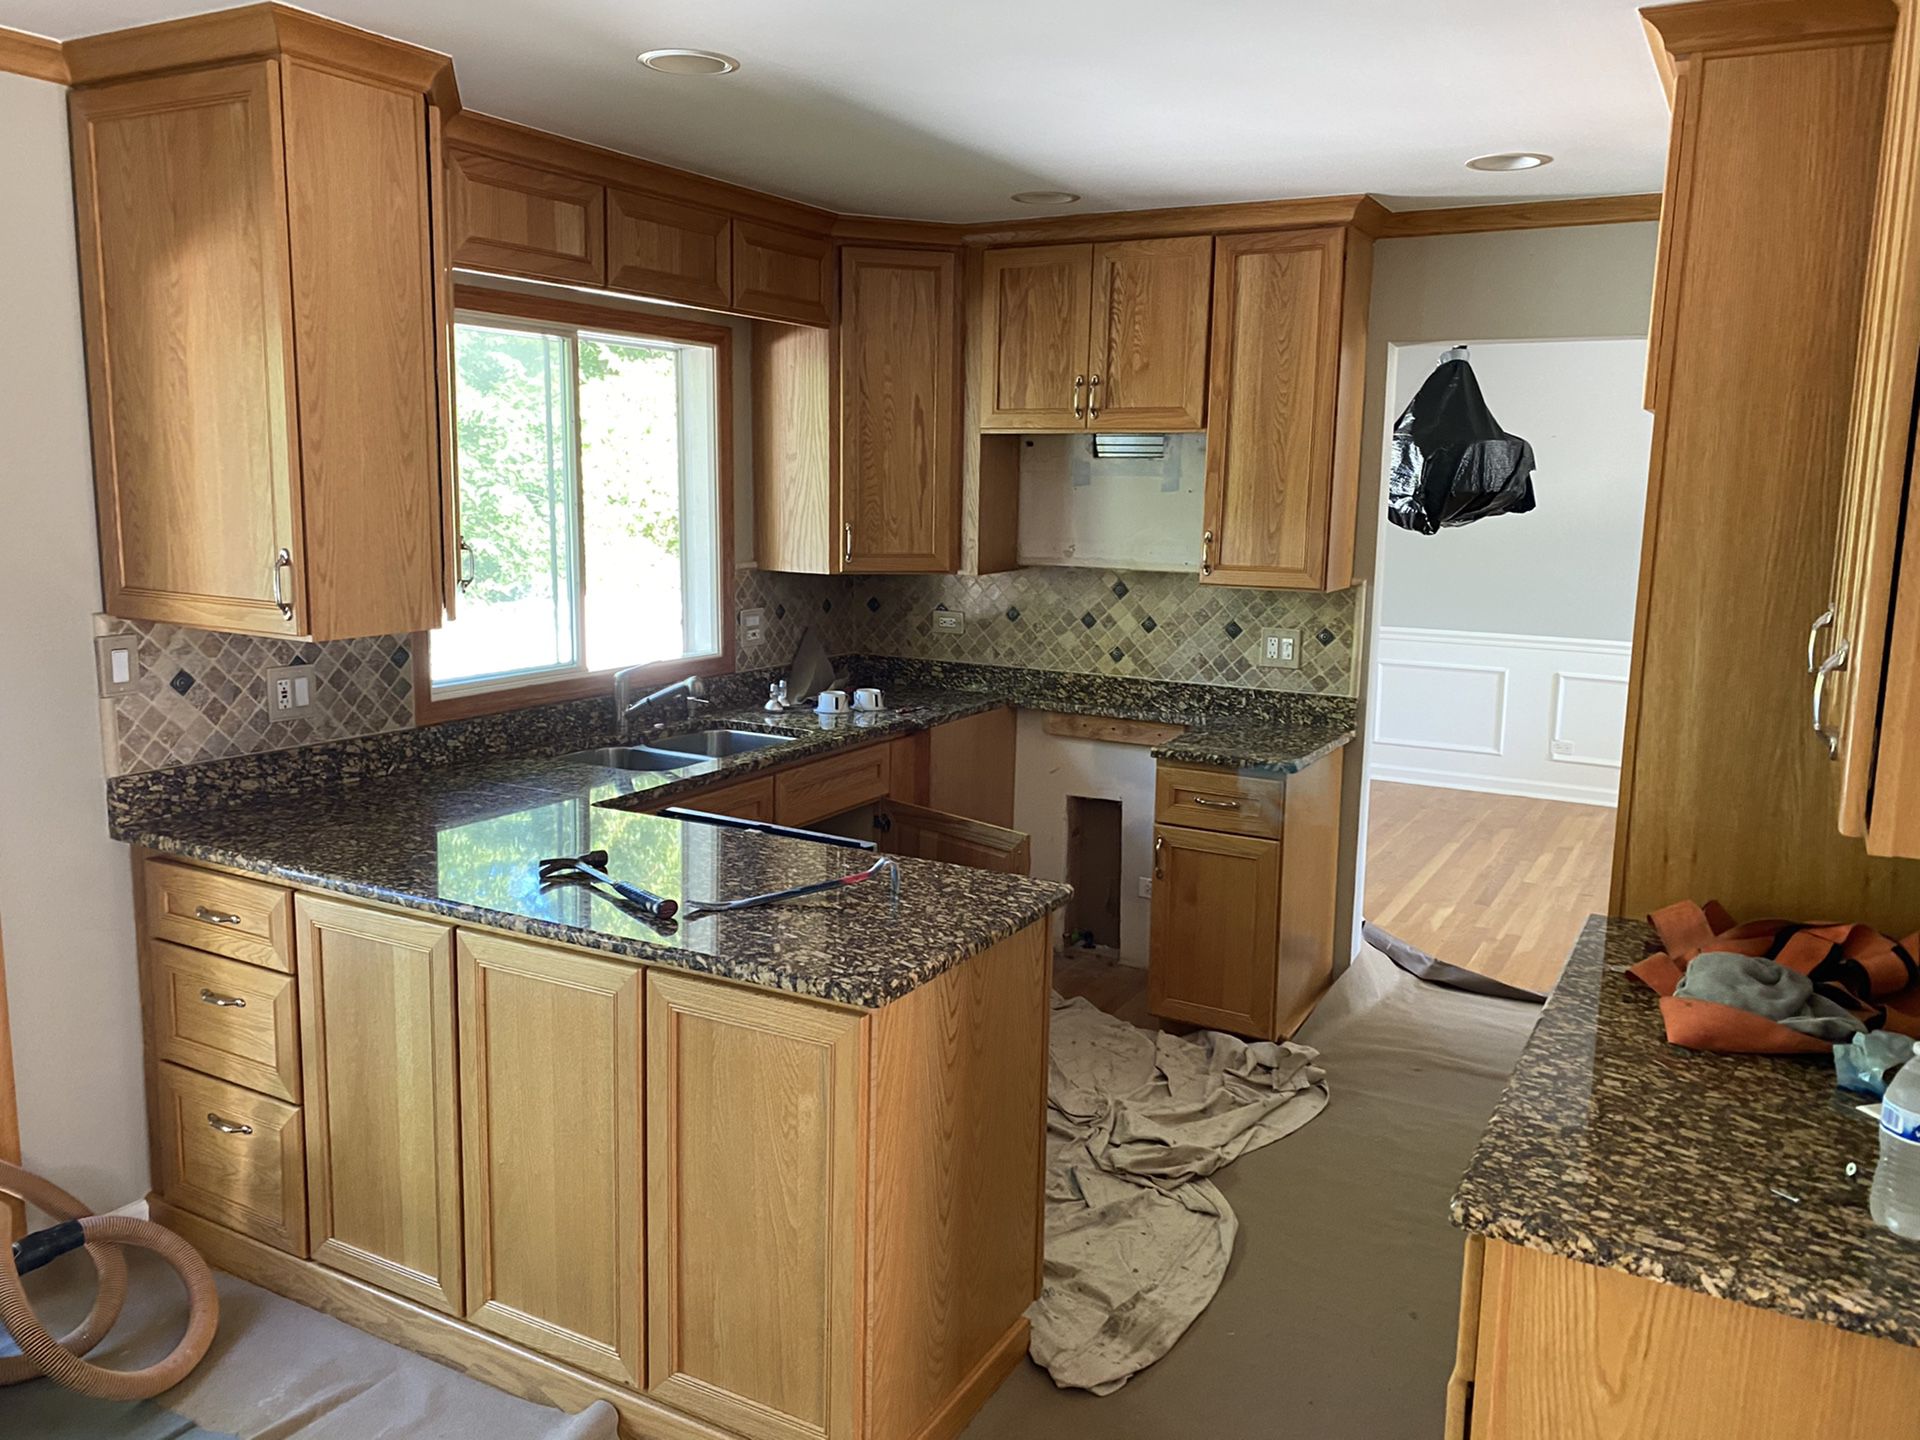 Kitchen cabinets with countertops, sink